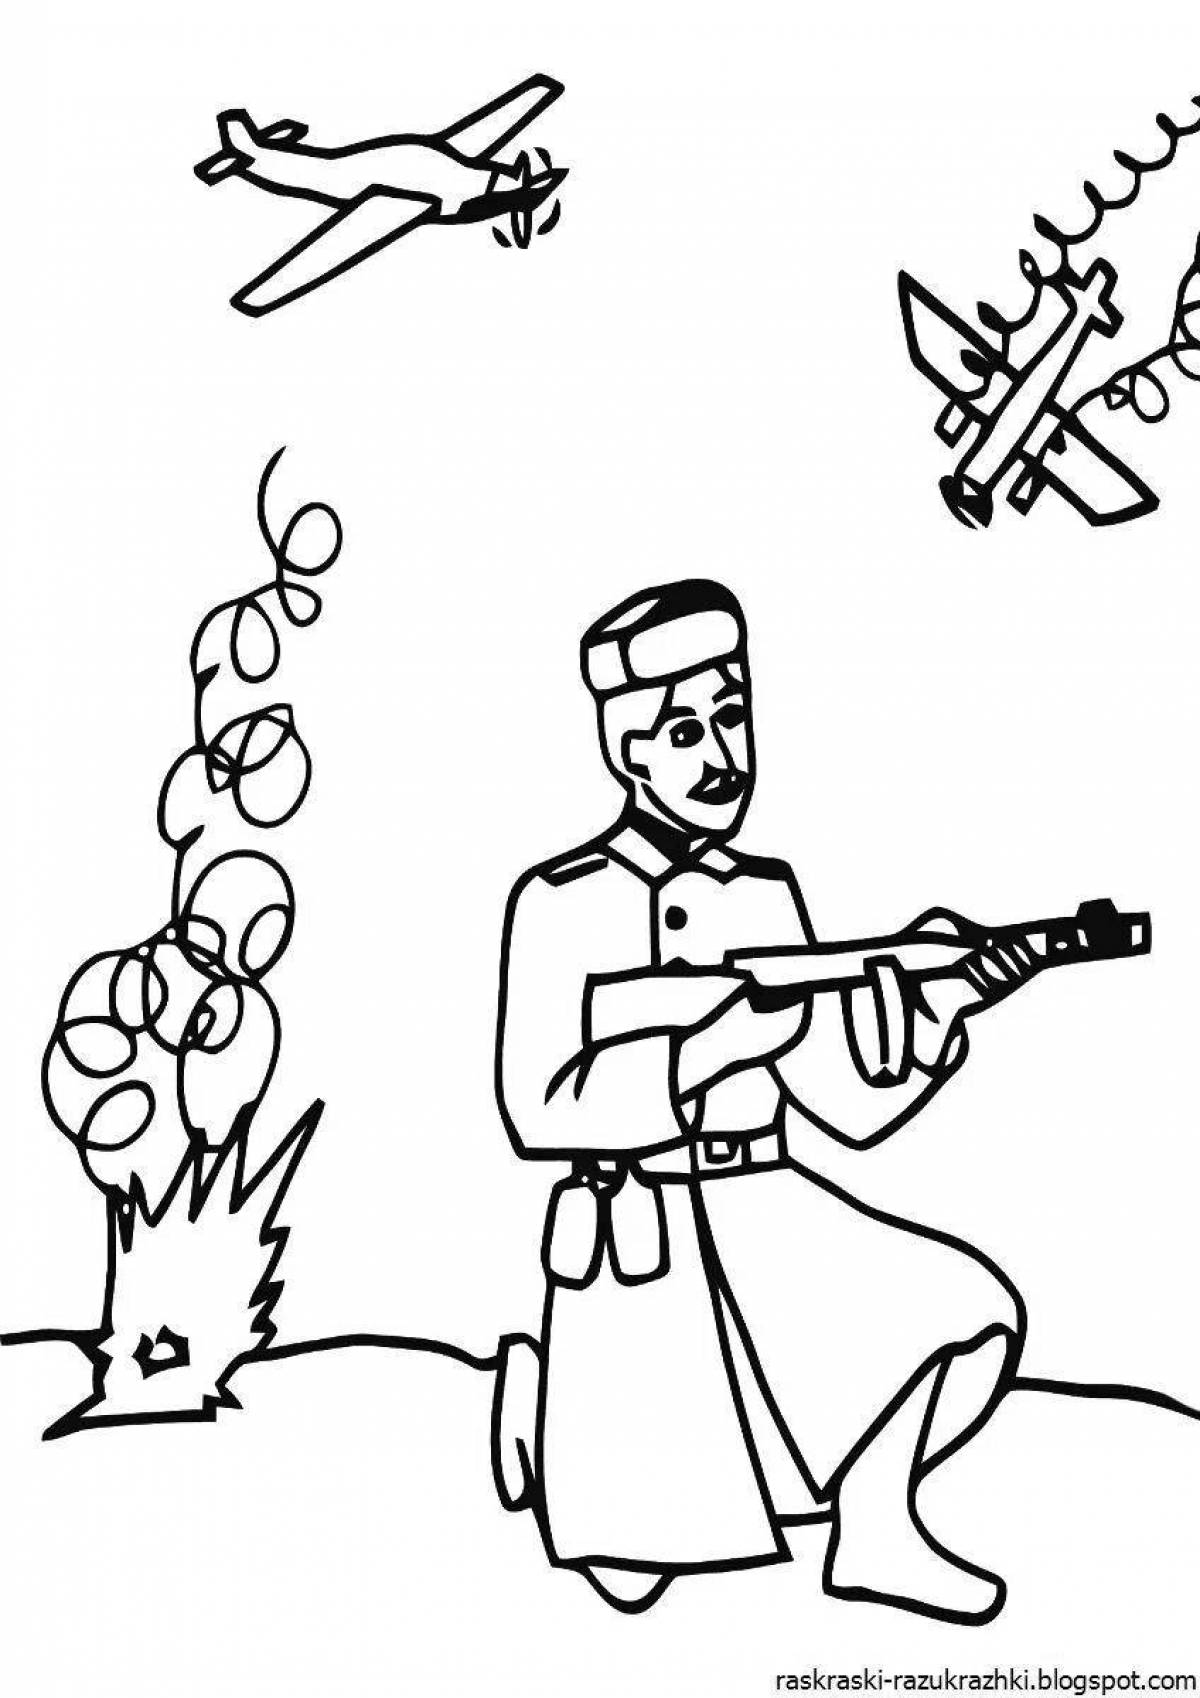 Detailed war coloring book for kids